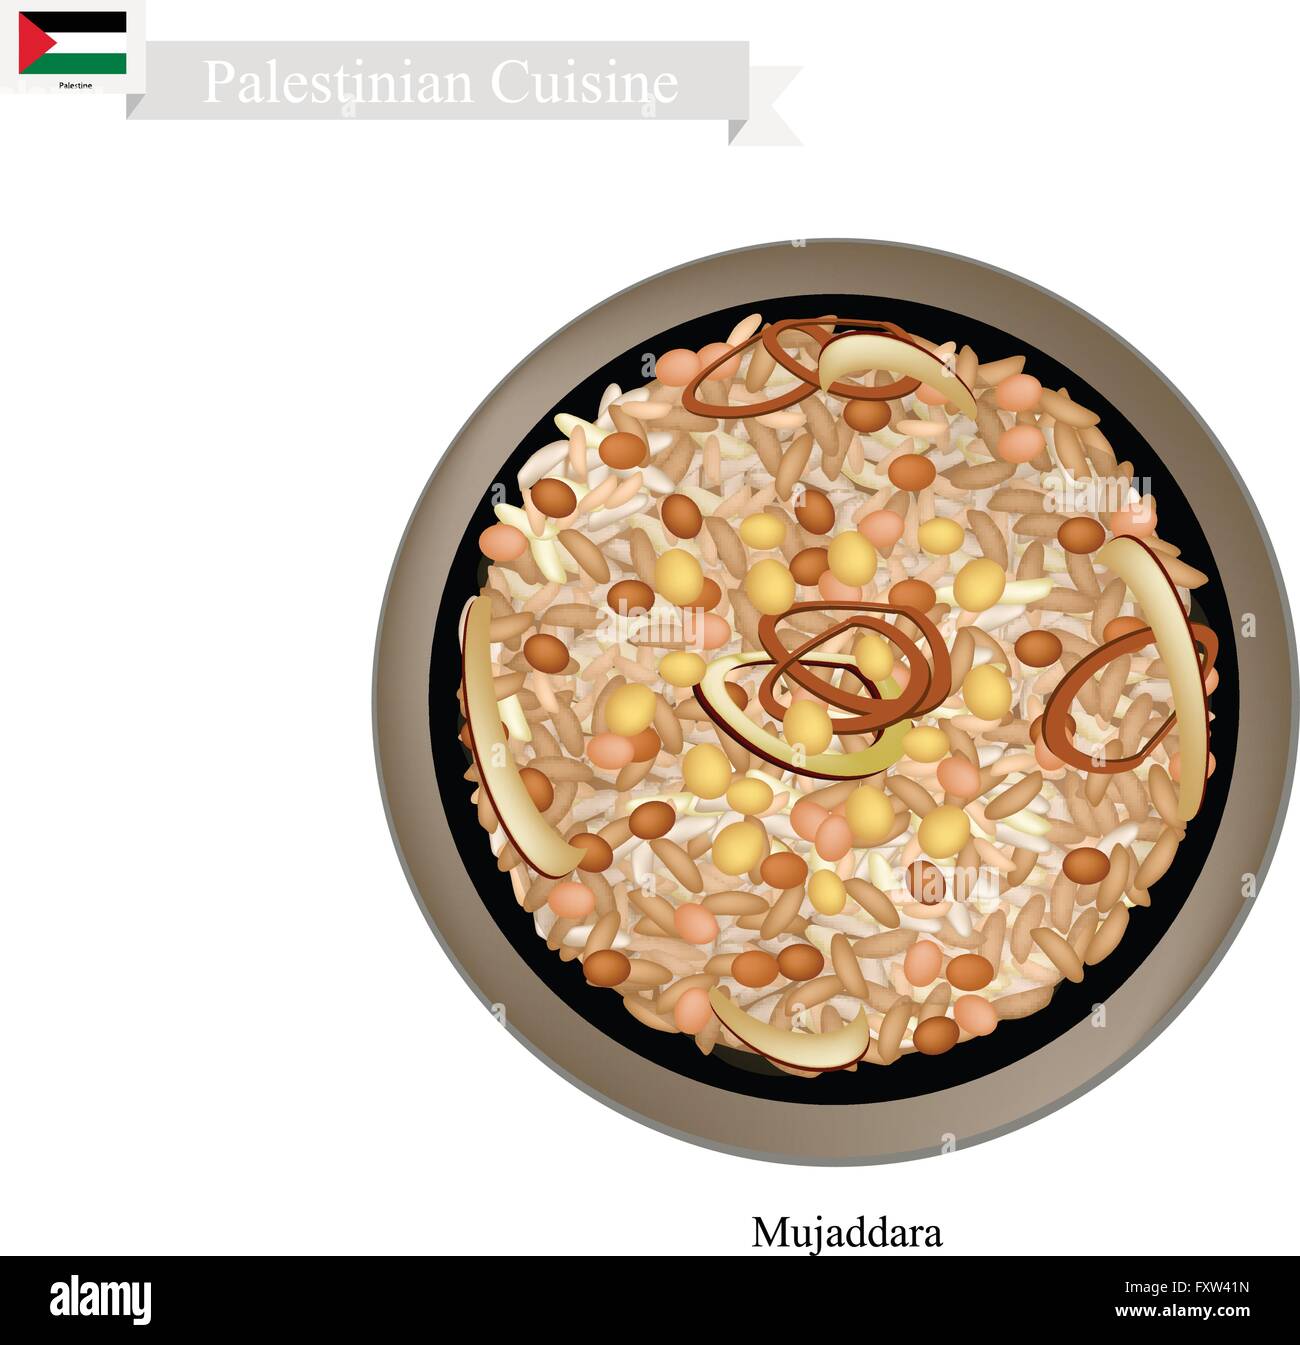 Palestinian Cuisine, Mujaddara or Traditional Rice and Lentils Topped with Crispy Onions. One of The Most Popular Dish in Palest Stock Vector